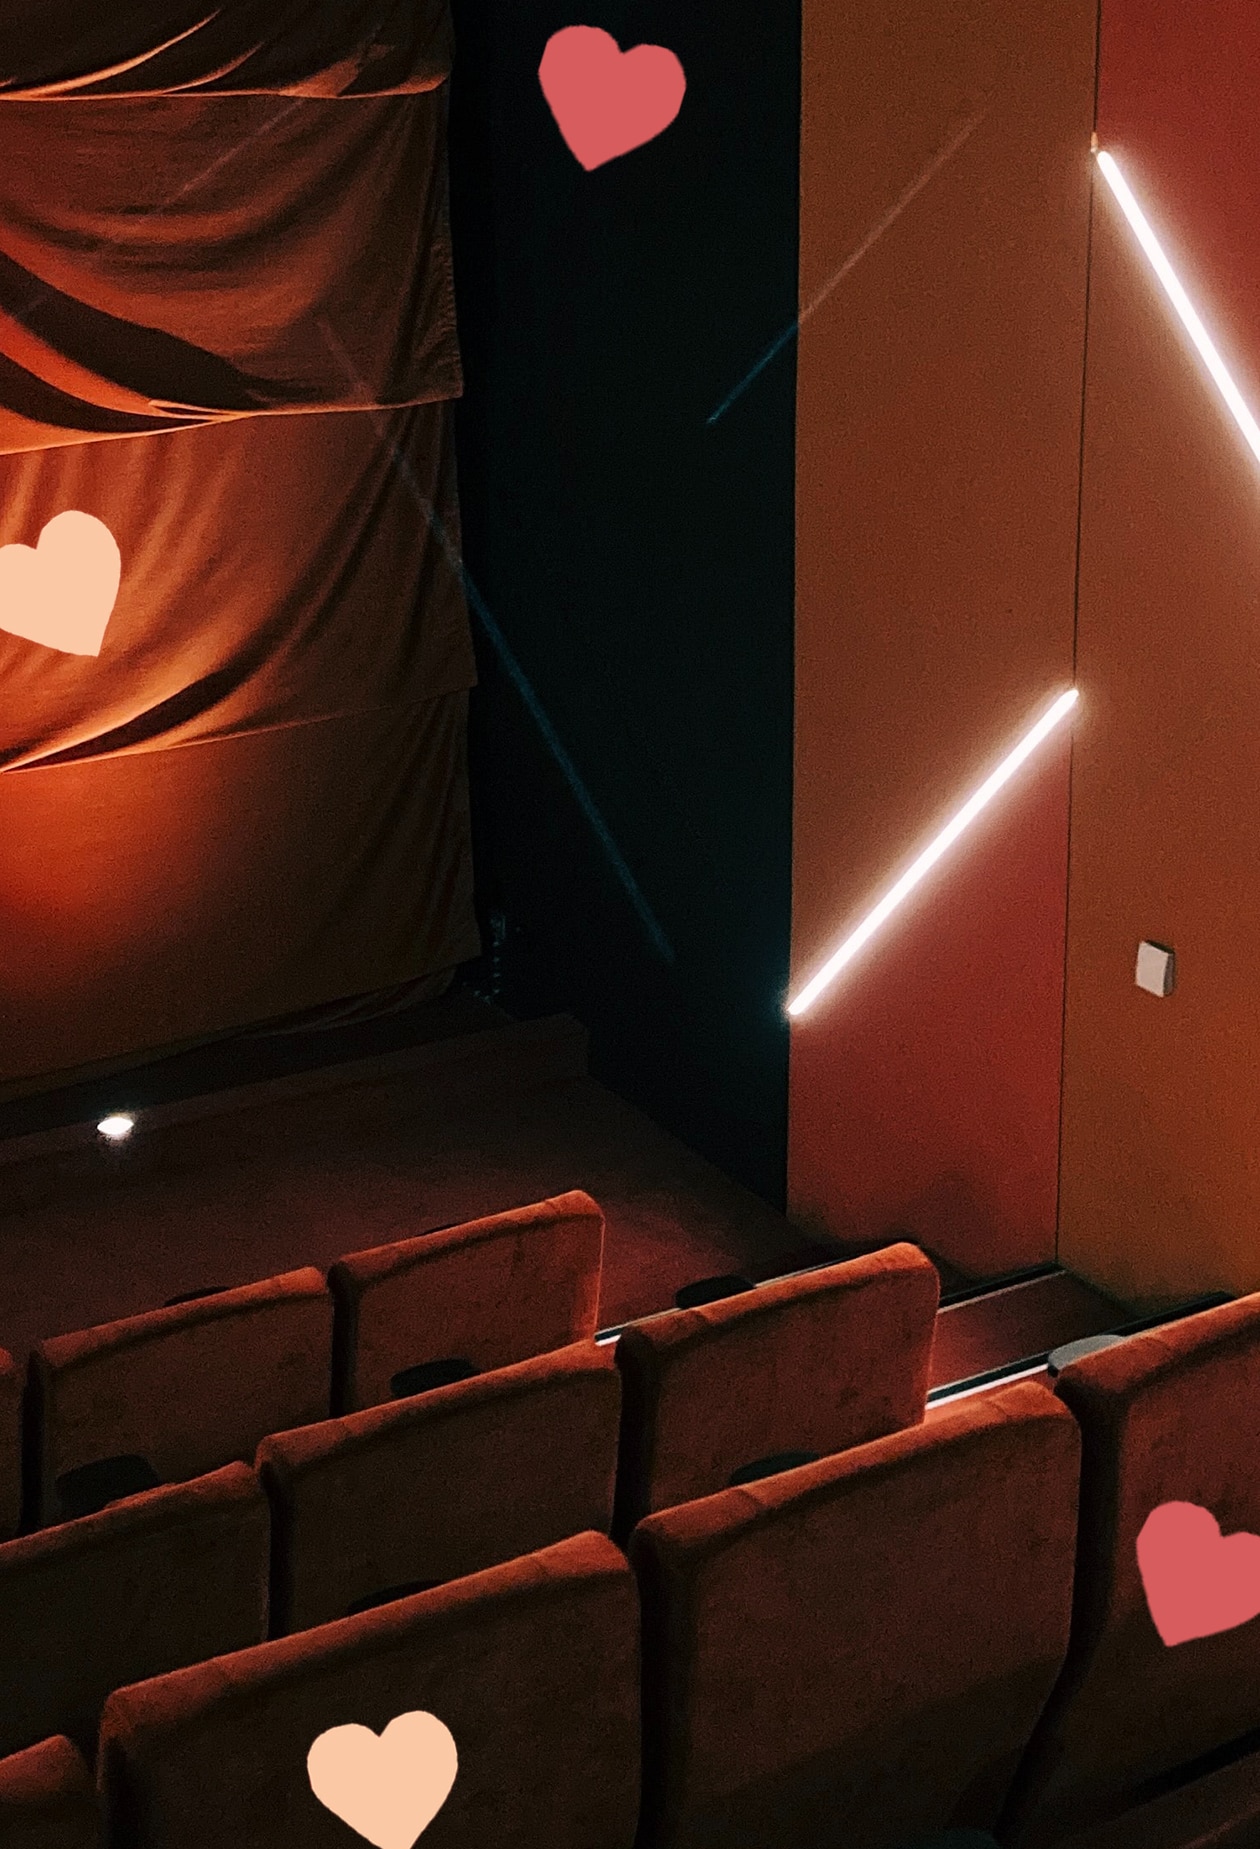 vertical shot of movie theatre, with classic red seats in front, light and curtain in back. scattered hearts decorate the image.